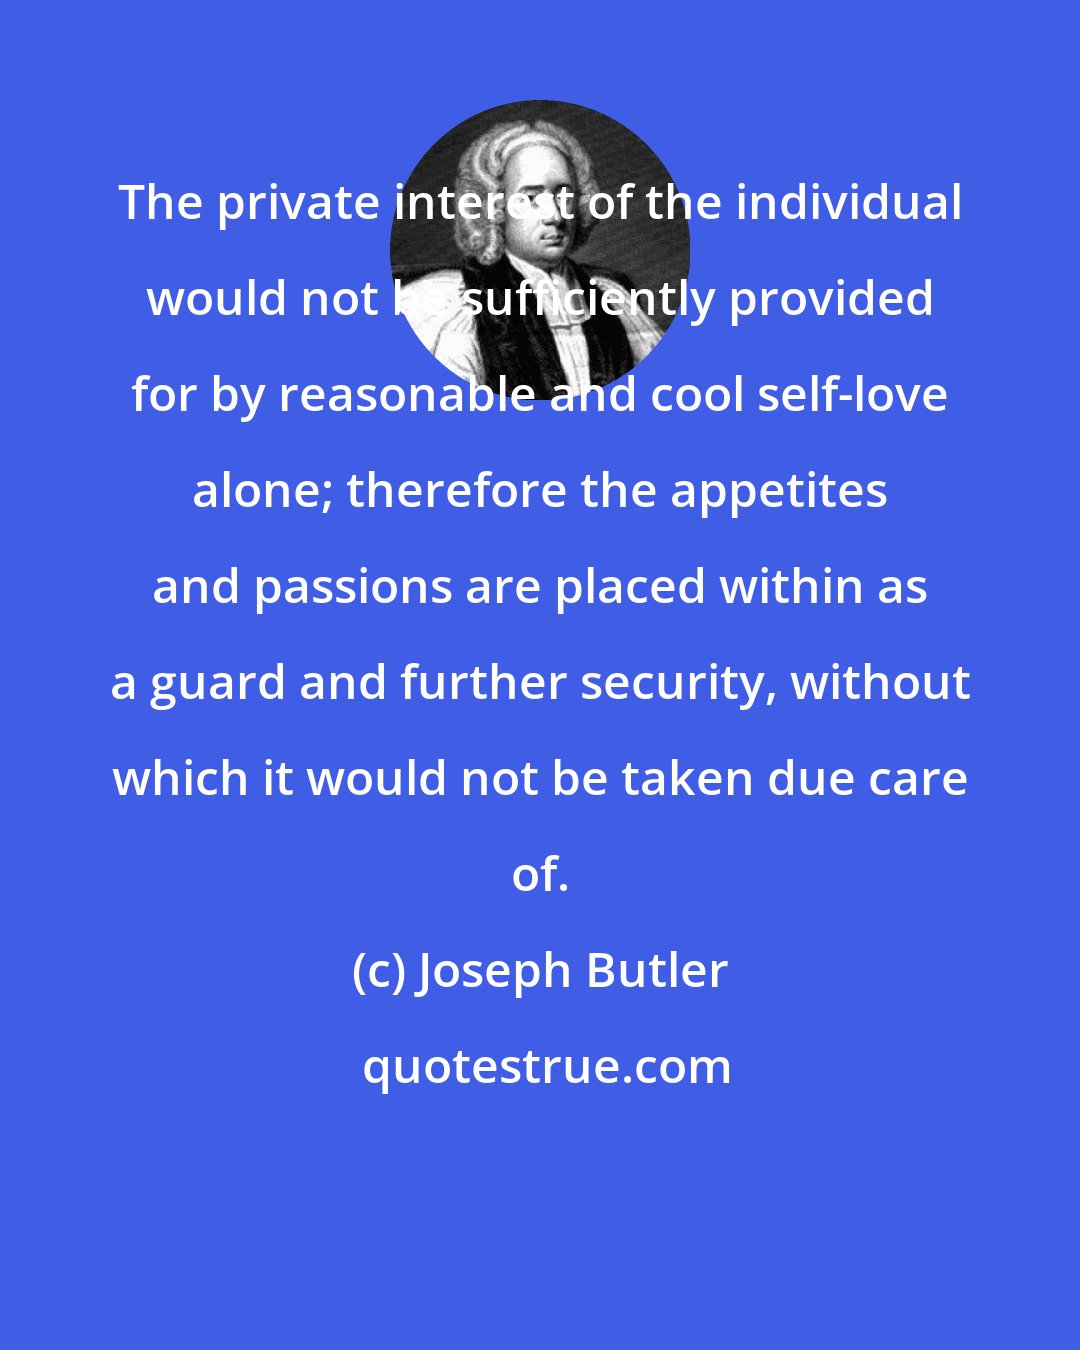 Joseph Butler: The private interest of the individual would not be sufficiently provided for by reasonable and cool self-love alone; therefore the appetites and passions are placed within as a guard and further security, without which it would not be taken due care of.